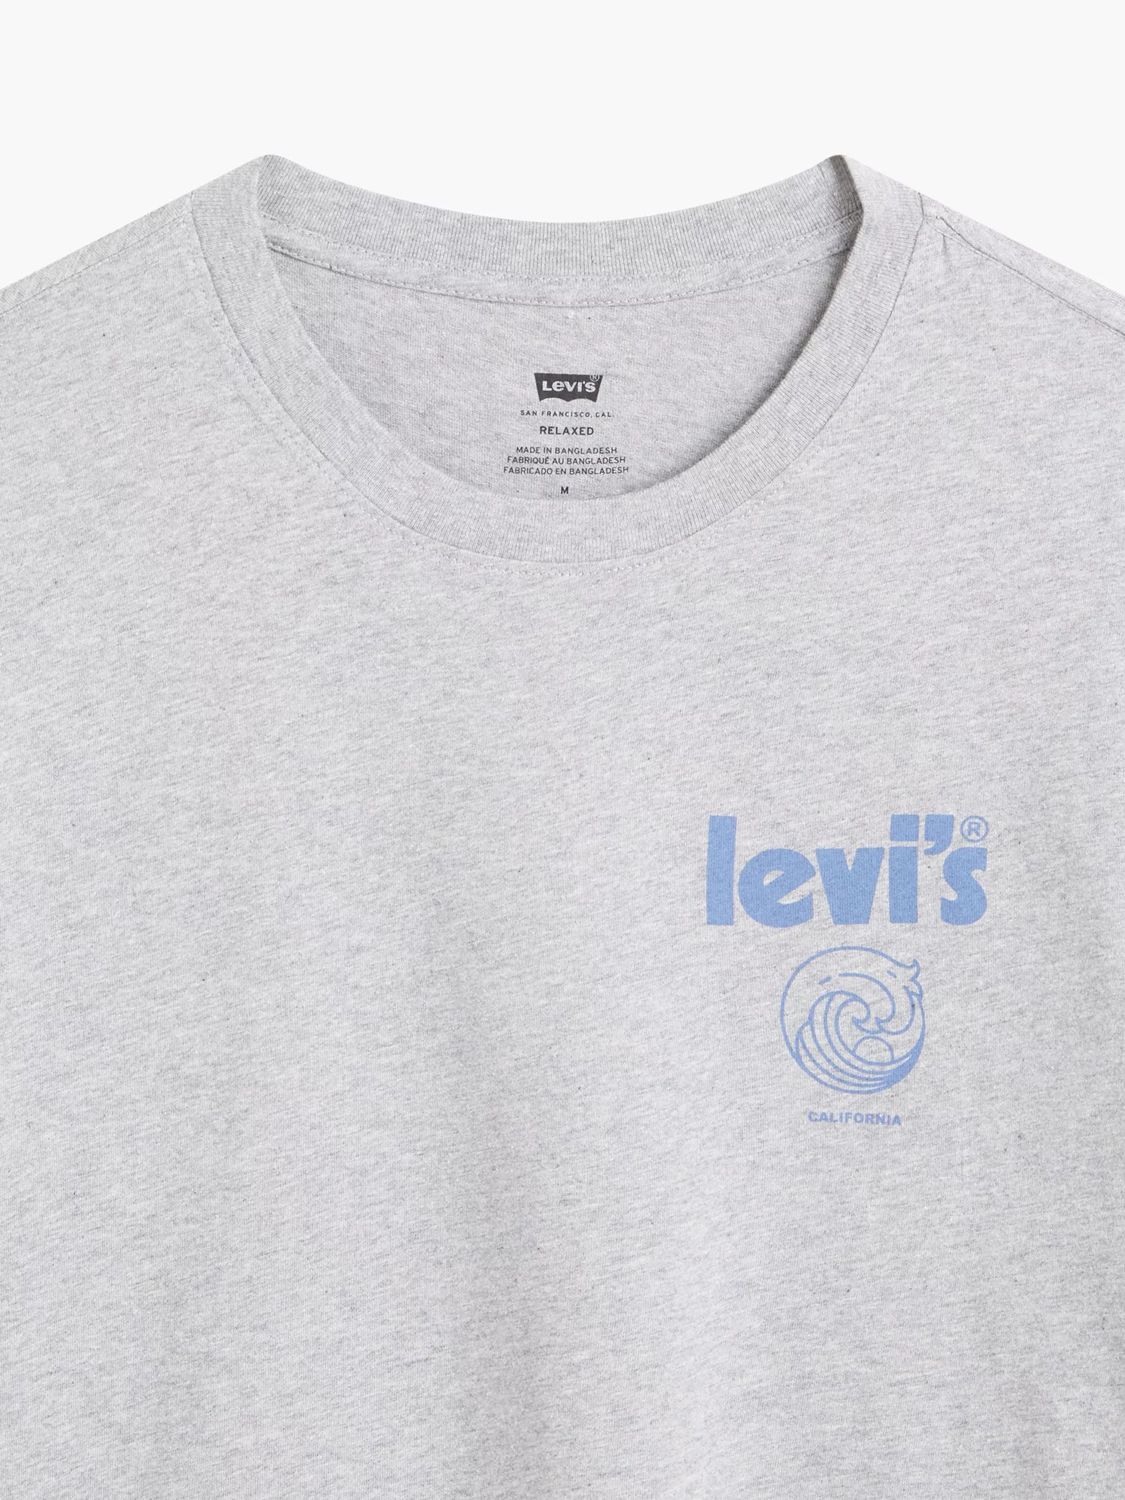 Levi's Relaxed Fit Logo Print T-Shirt, Grey